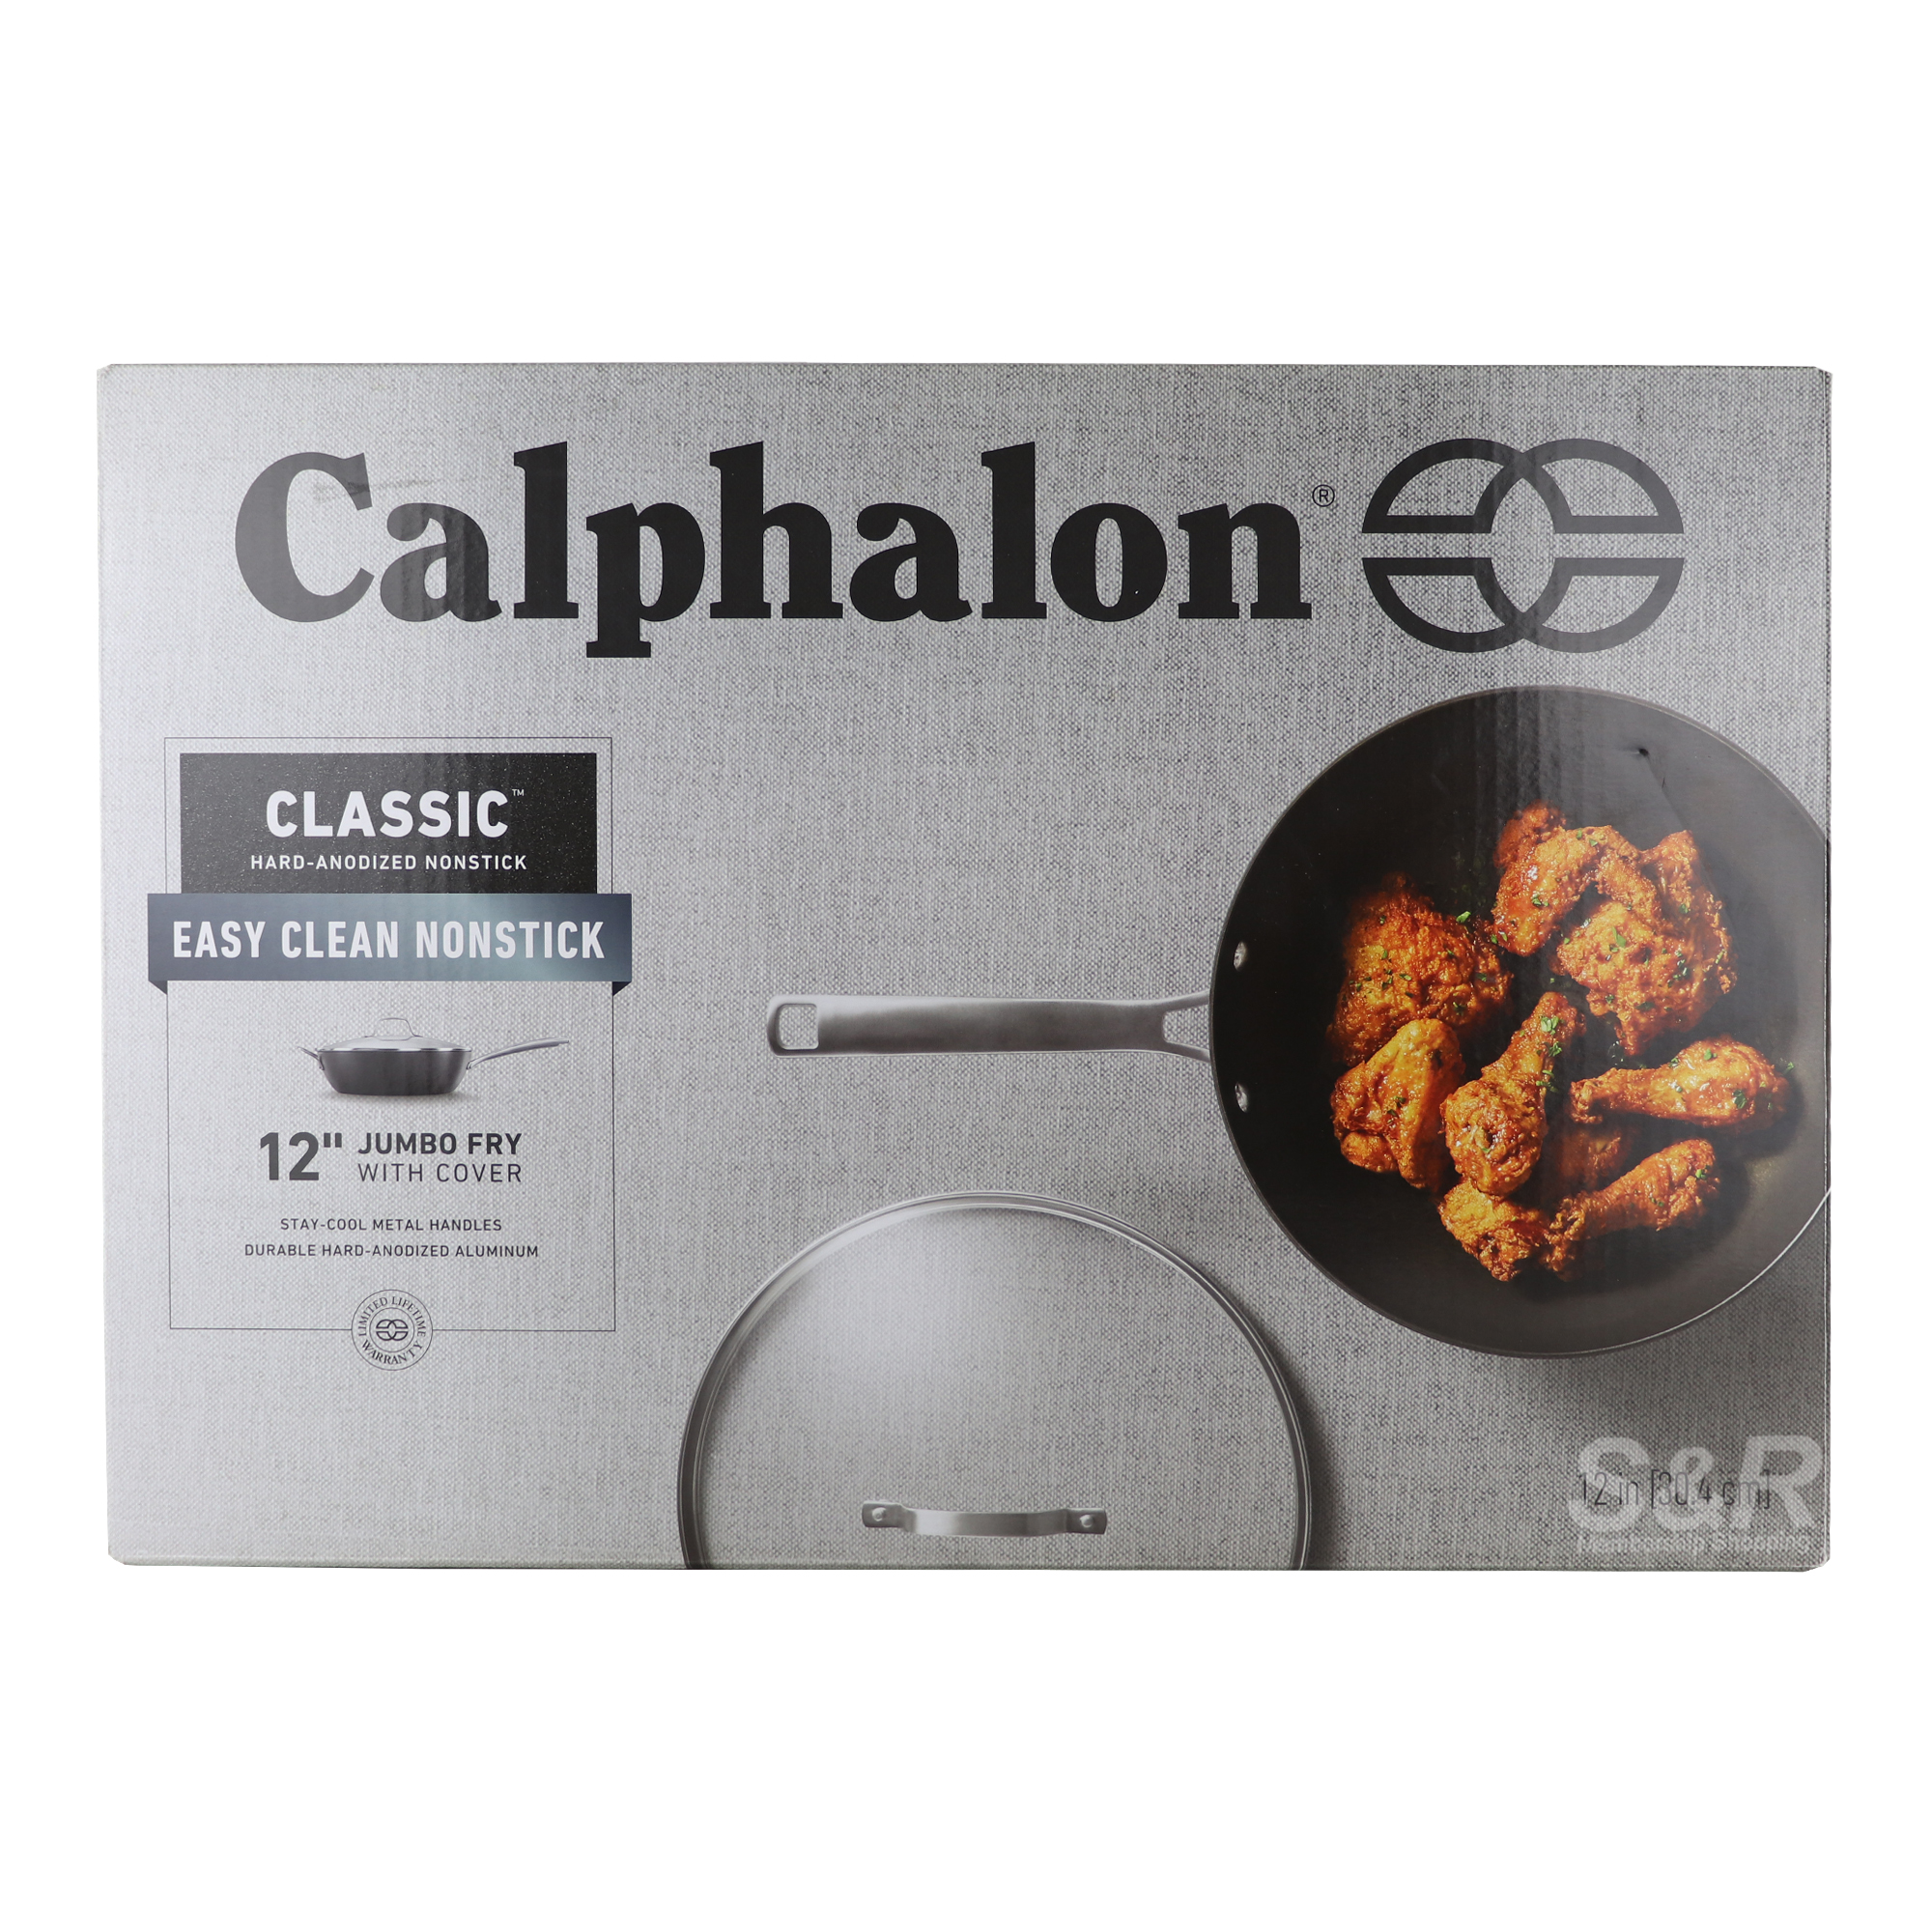 https://www.snrshopping.com/upload/product/Calphalon-Classic-12--Jumbo-Fry-with-Cover-1pc-9869/Calphalon%20Classic%2012%20Jumbo%20Fry%20with%20Cover%201pc-opmFTu1ZXJ.jpg